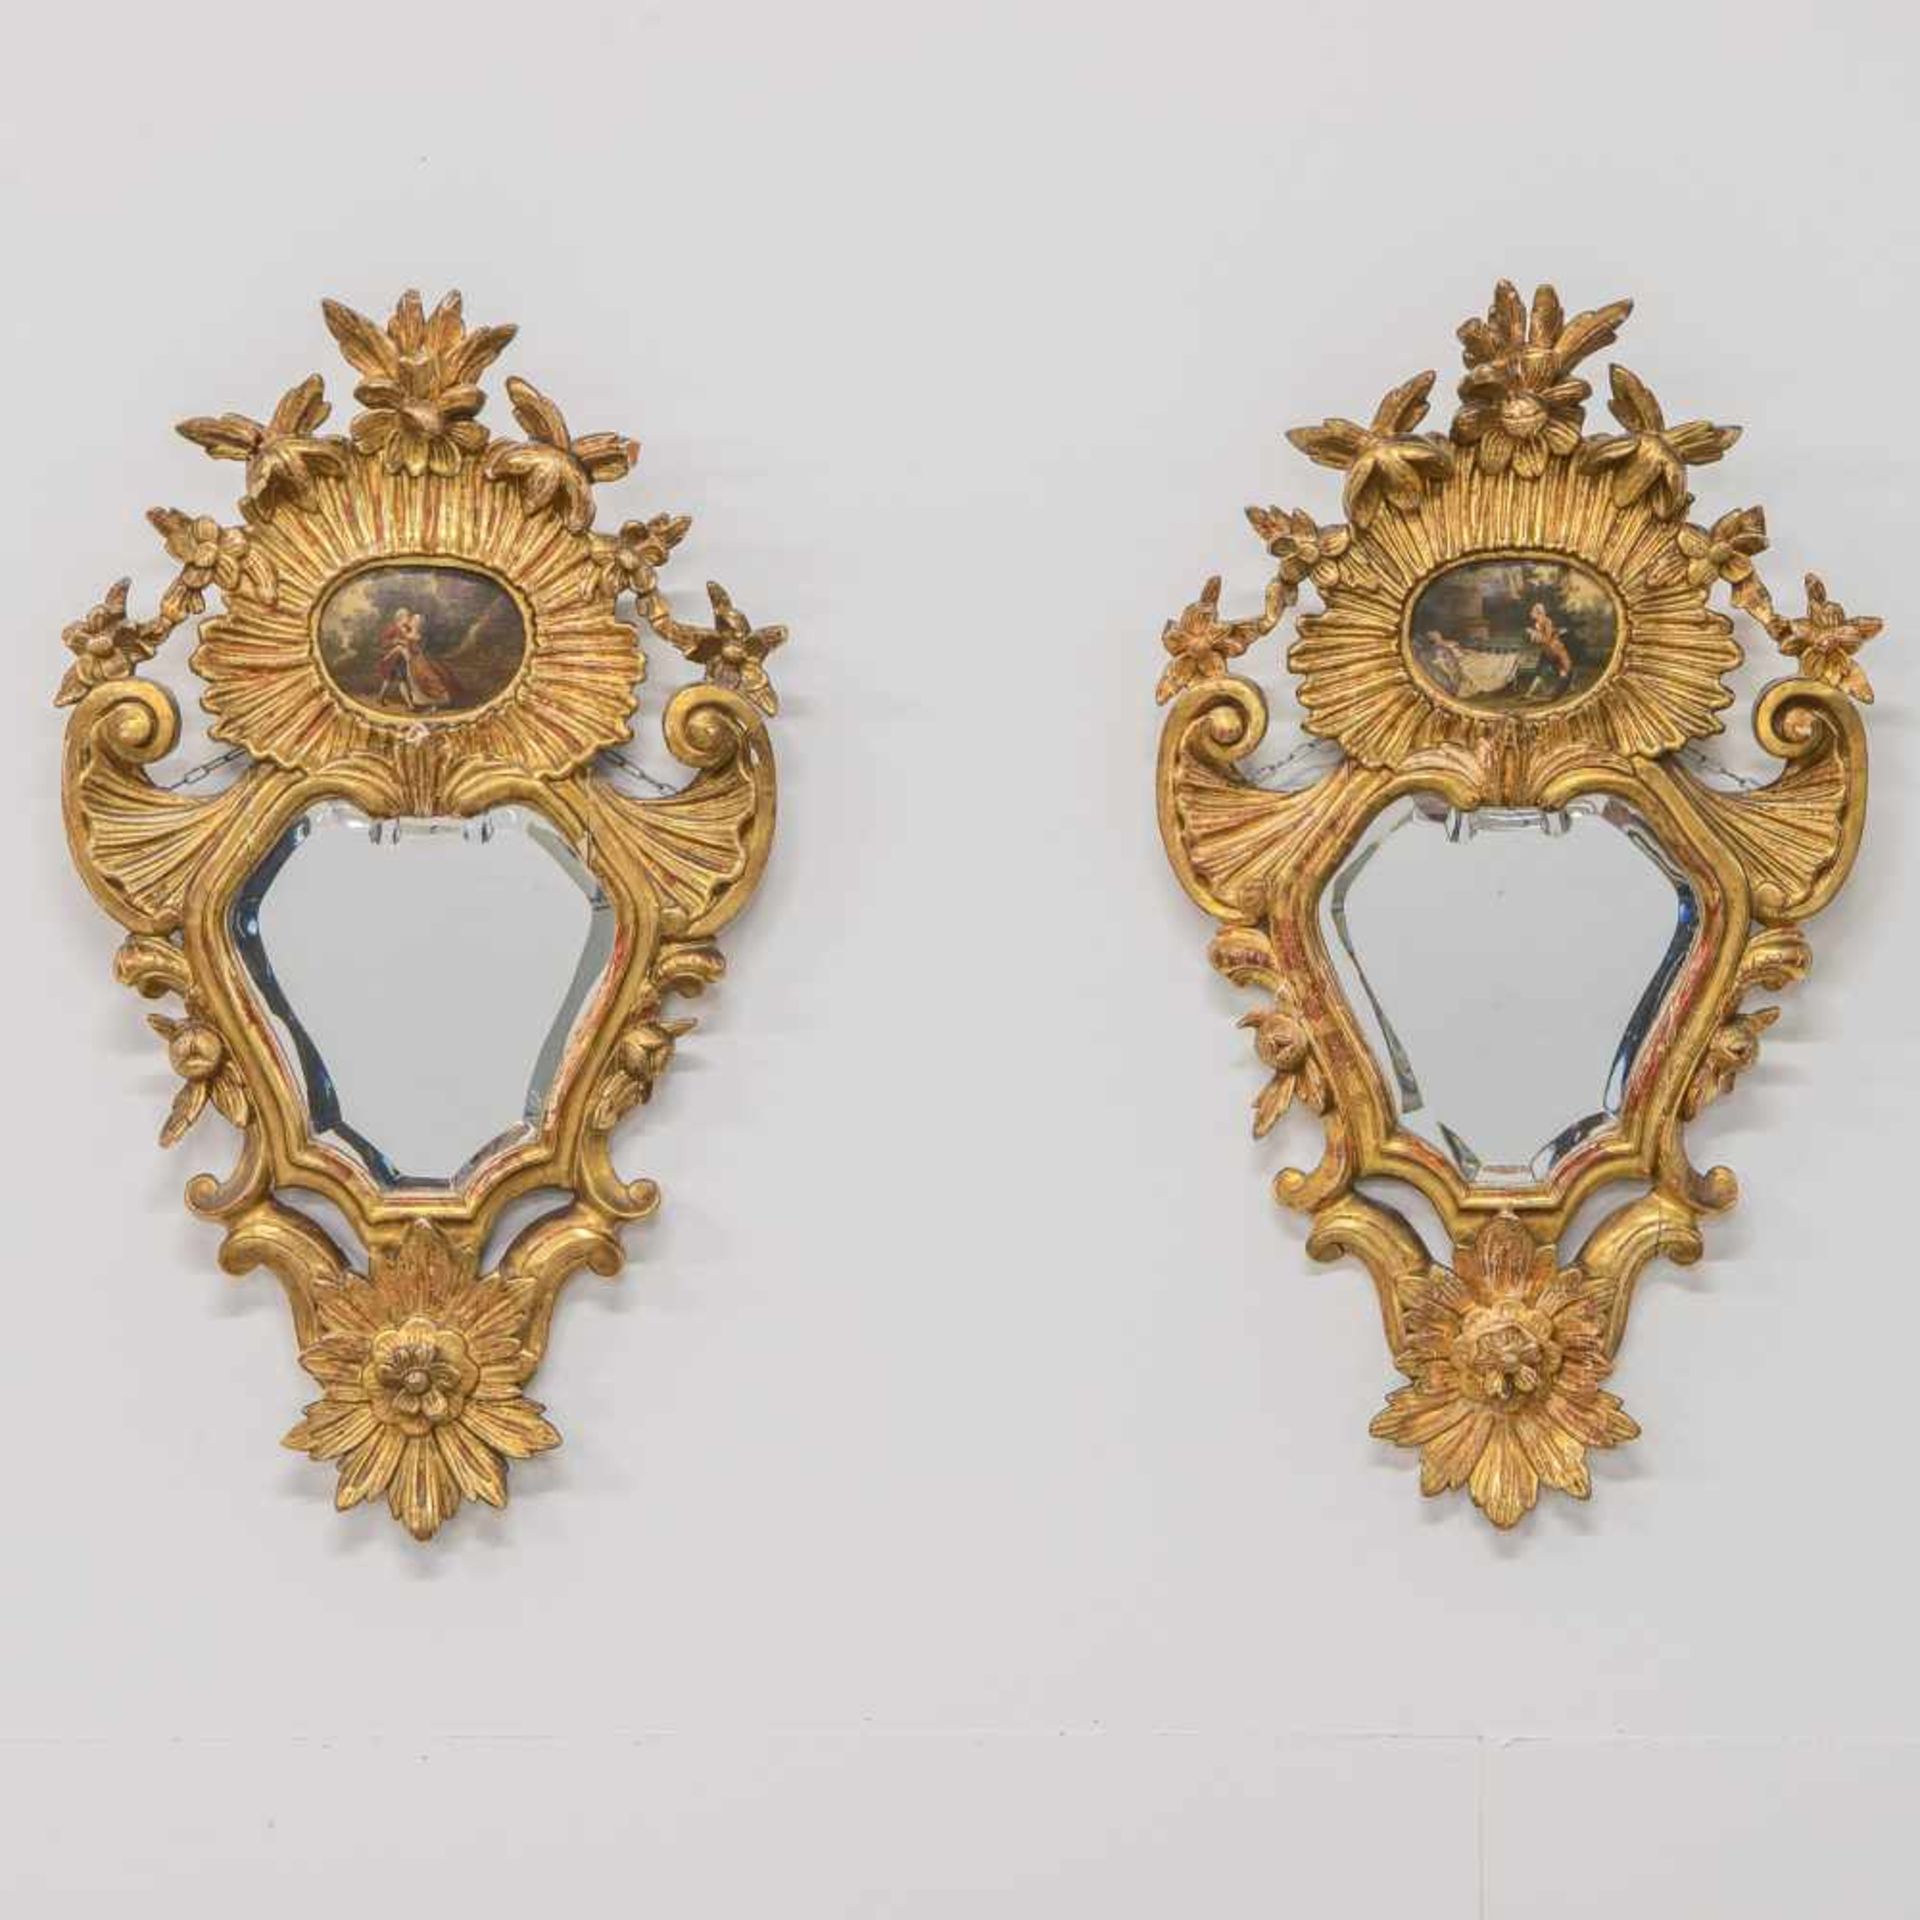 Antique pair of 19th century mirrors, made of sculptured gilt wood with a small painting mounted